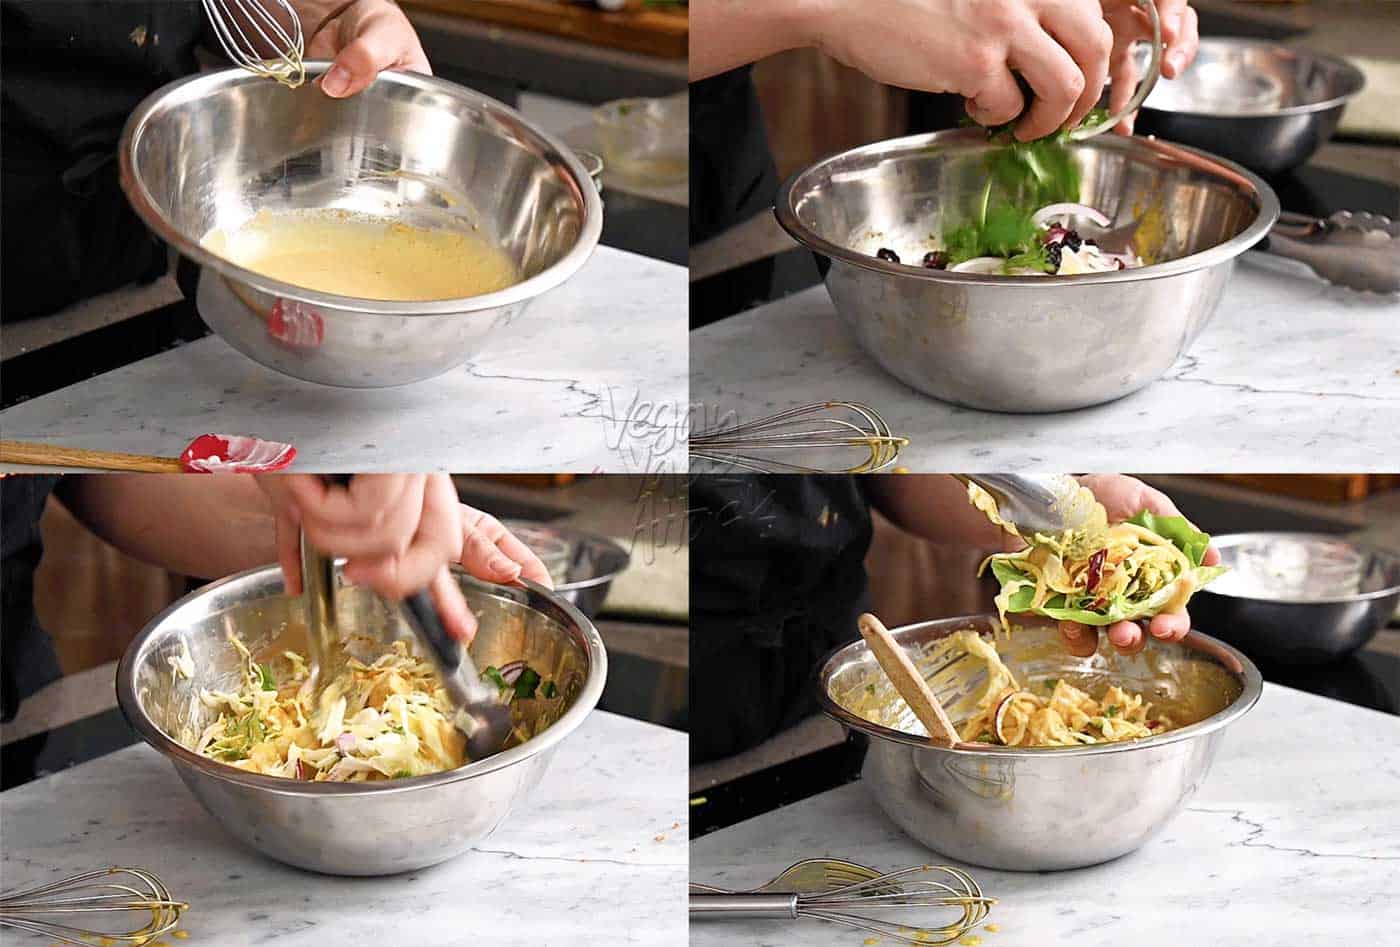 Image collage of tossing together curried tofu Salad in a bowl